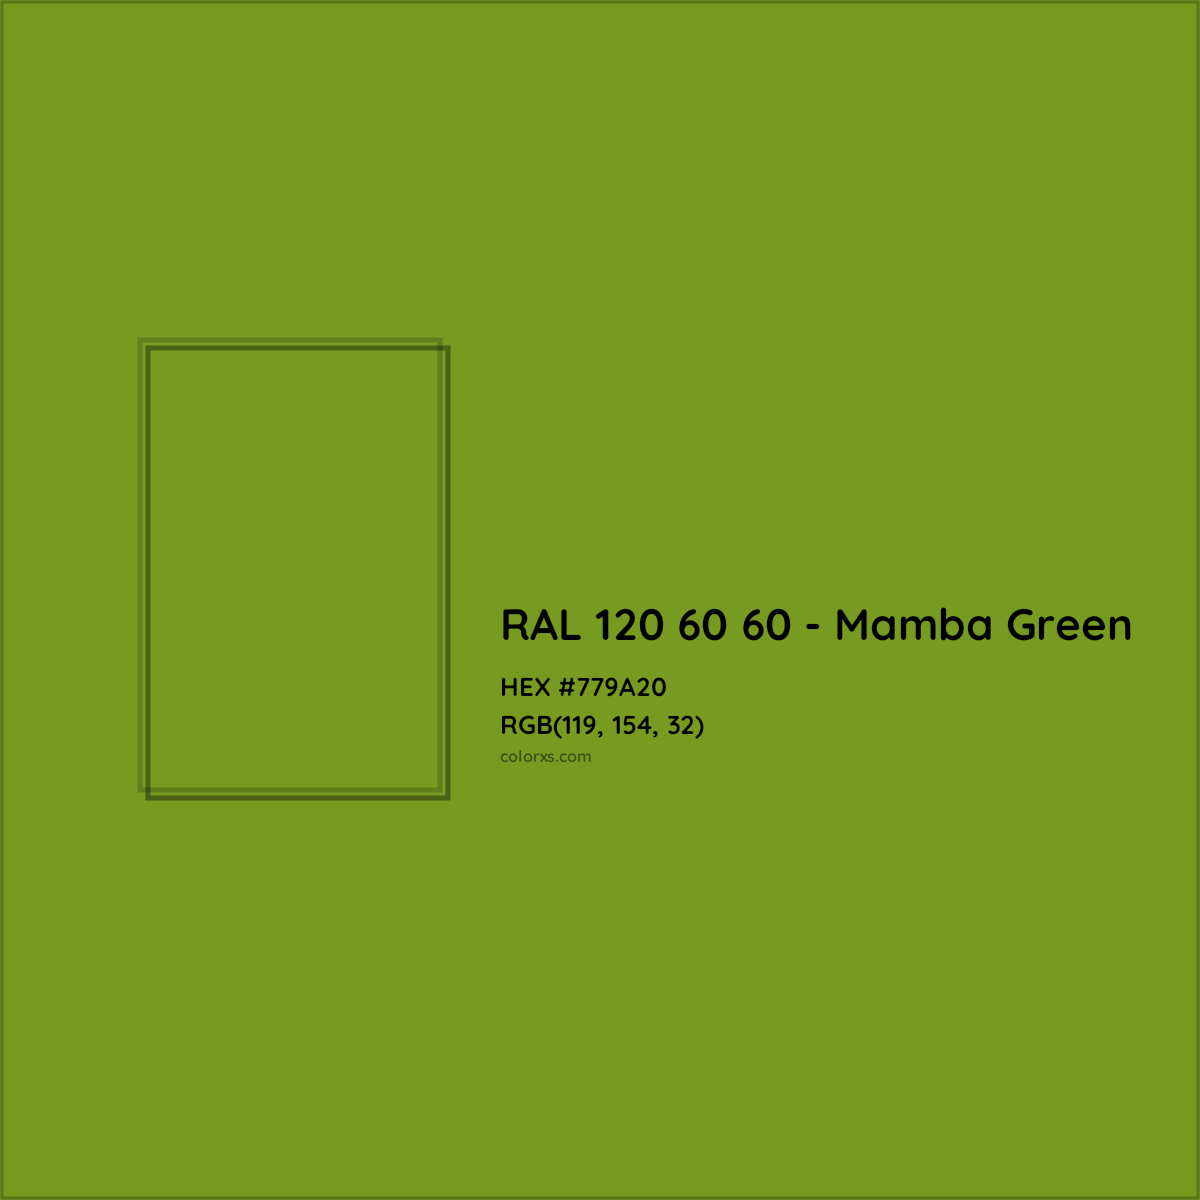 HEX #779A20 RAL 120 60 60 - Mamba Green CMS RAL Design - Color Code